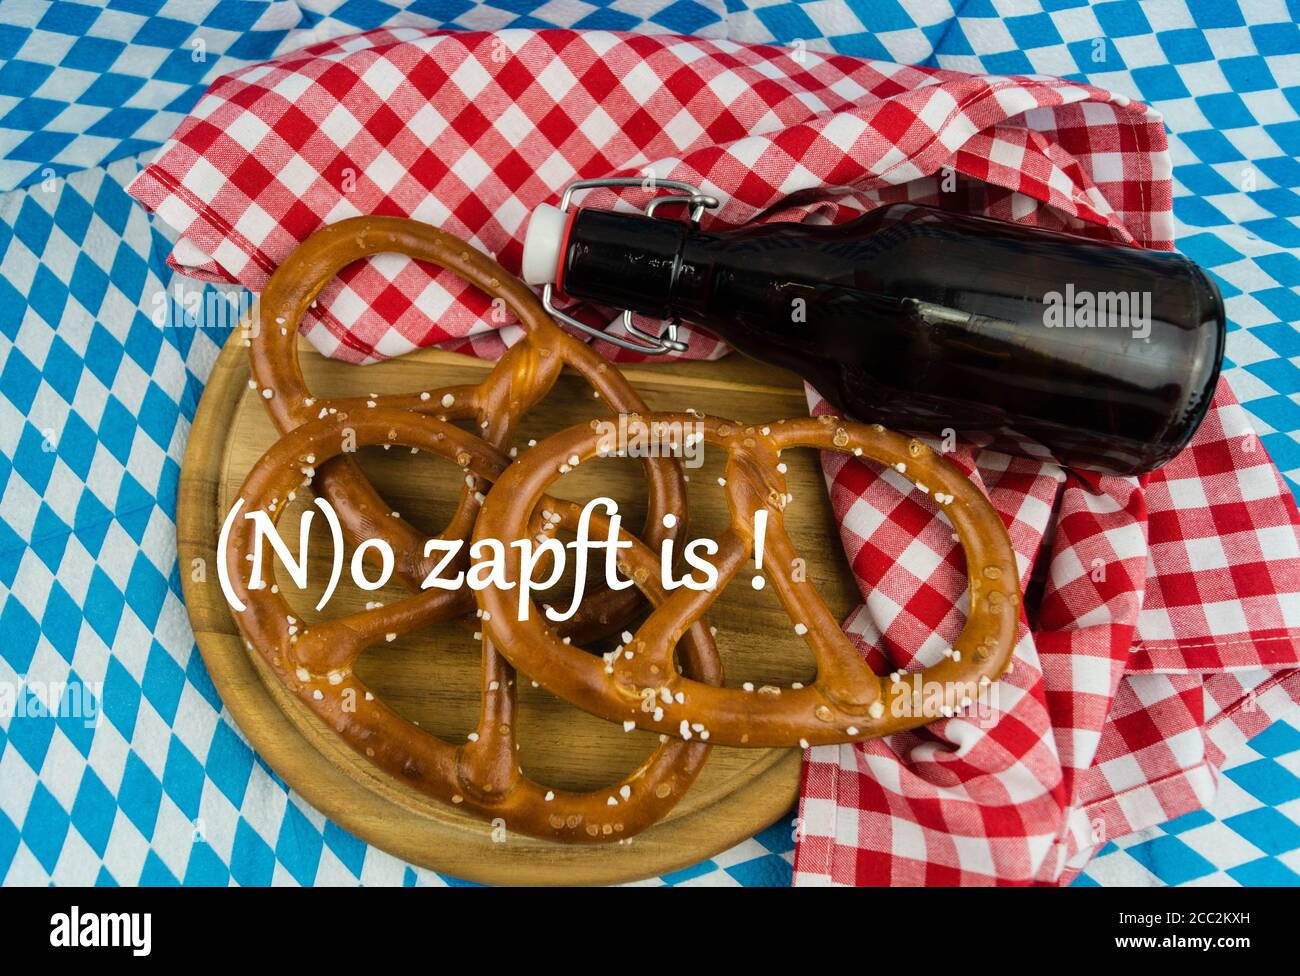 Bavarian Flag with beer and Brezel typical for the Munich beer Festival which is rejected this year caused by corona Lockdown (Translation: o zapft is Stock Photo